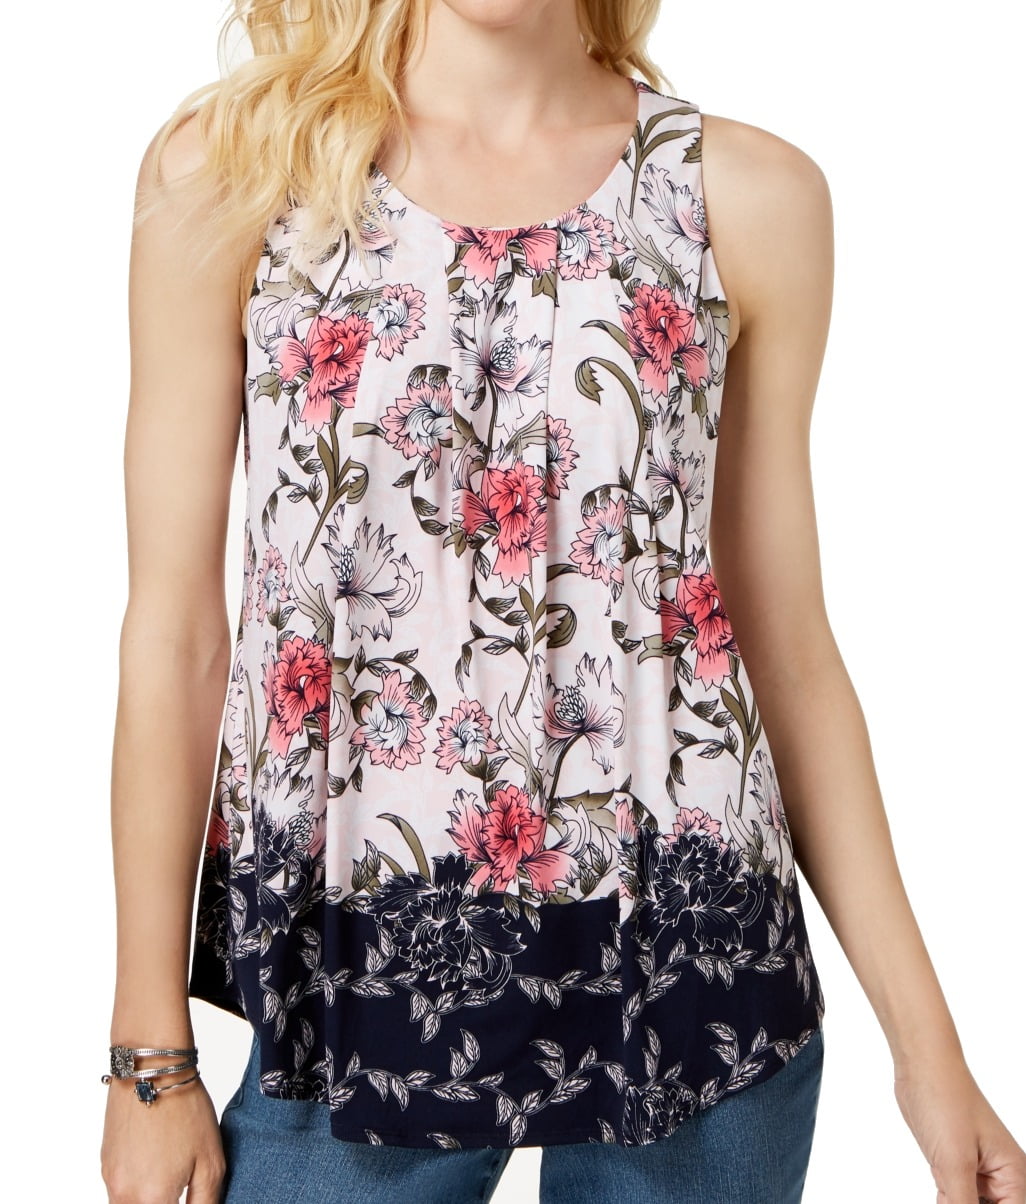 Charter Club - Womens Blouse Plus Colorblock Floral Pleated XXL ...